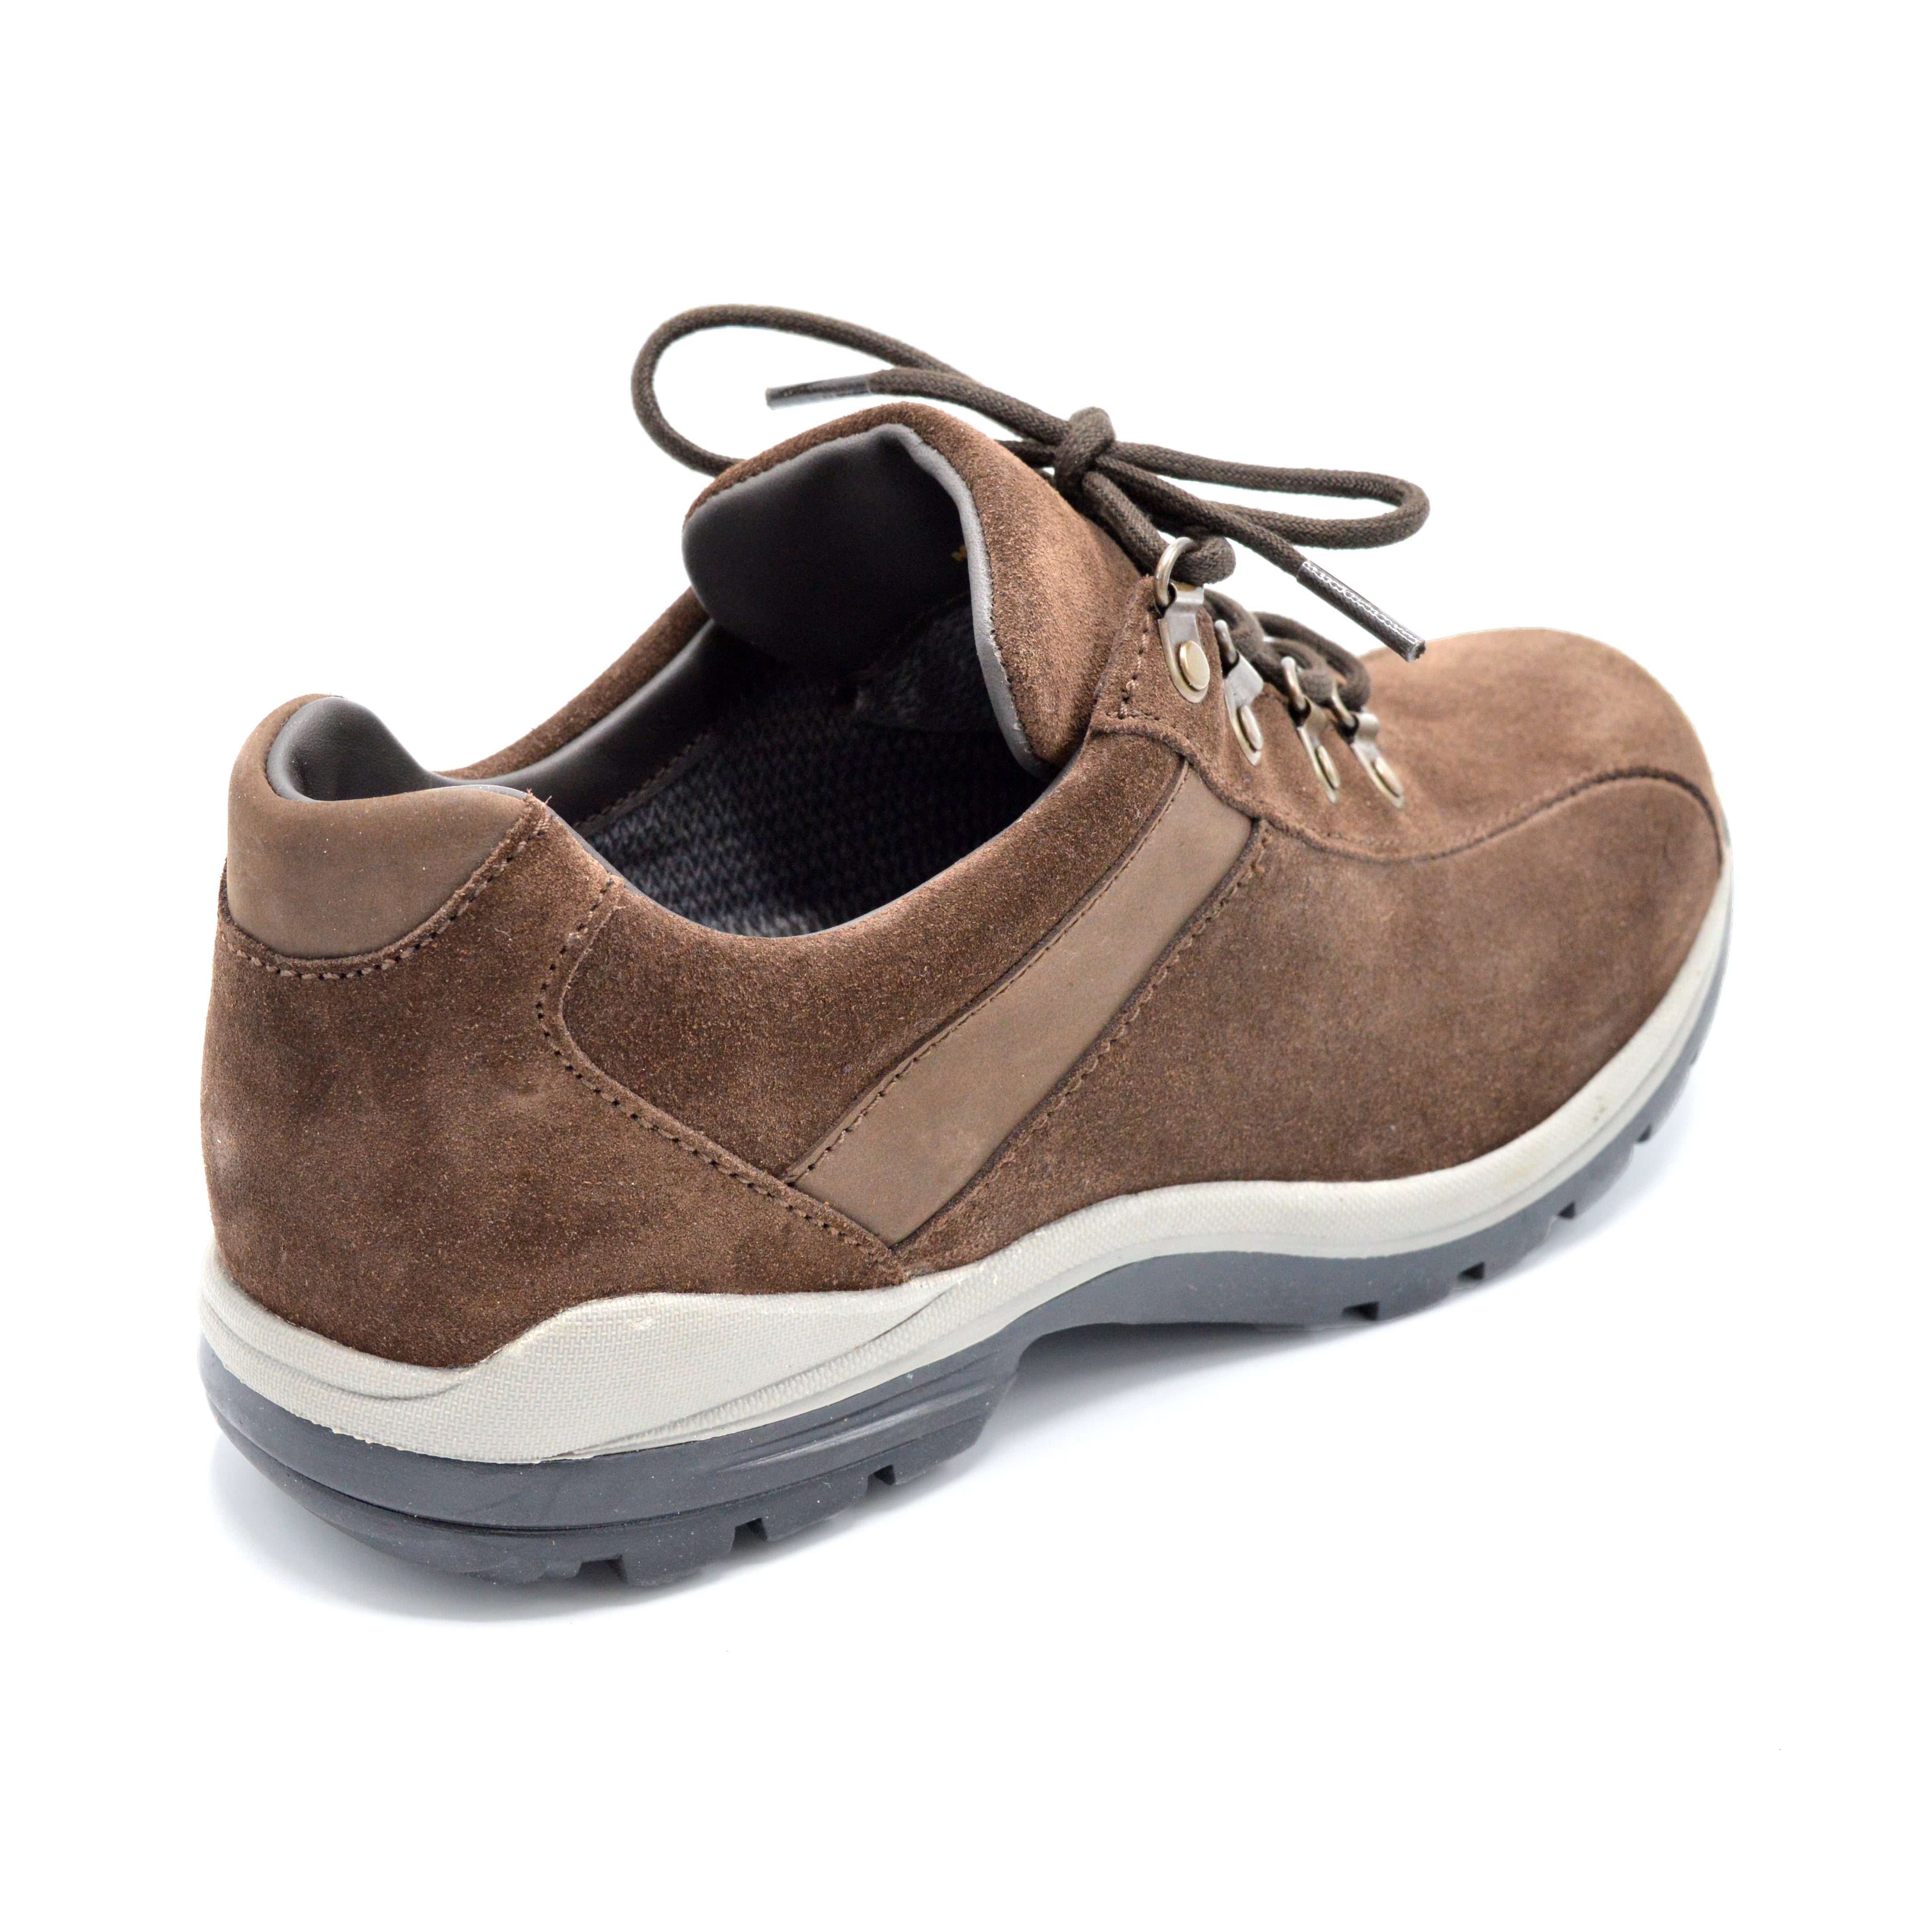 Comfortable Super Soft Extra Wide Shoe For Bunions